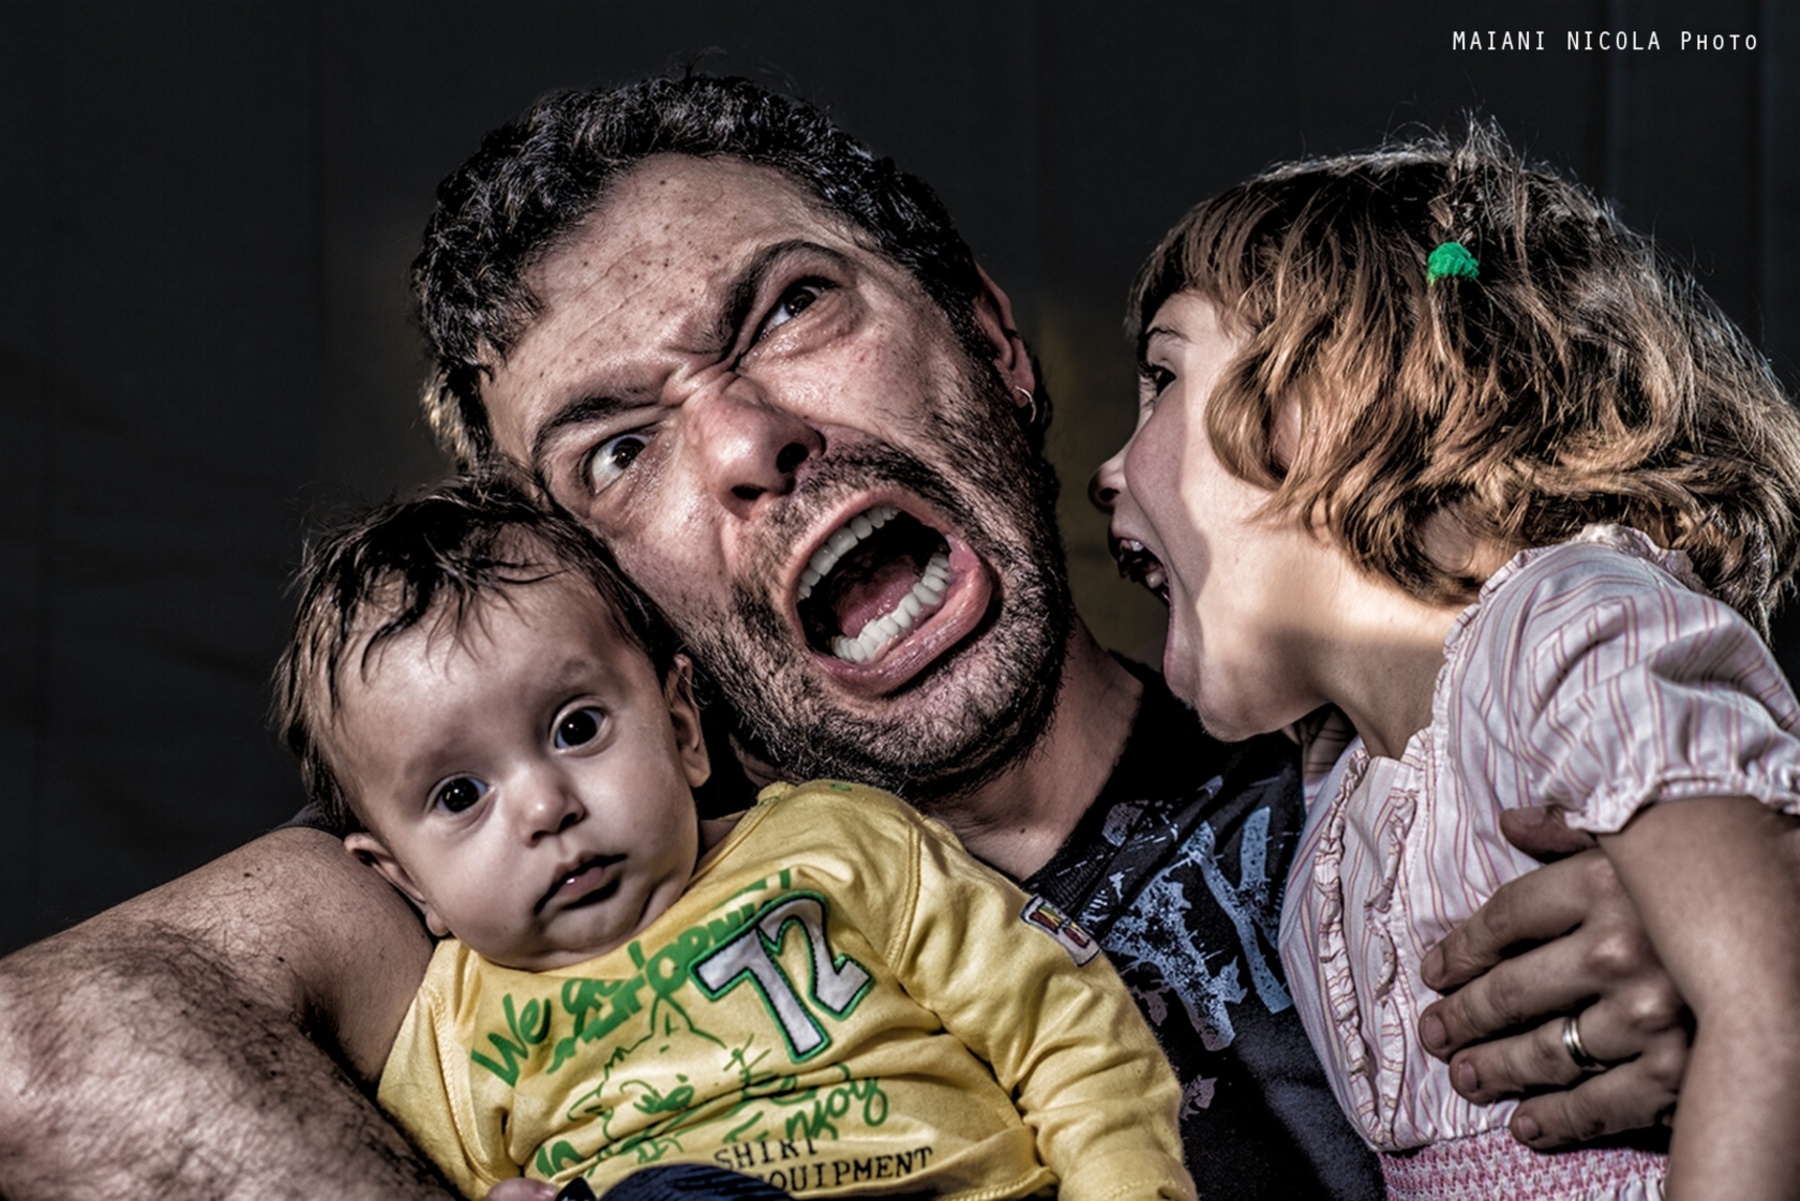 dad, Father, Children, Kids, Things, Parenting, Scream, Pout, Girl, Boy Wallpaper